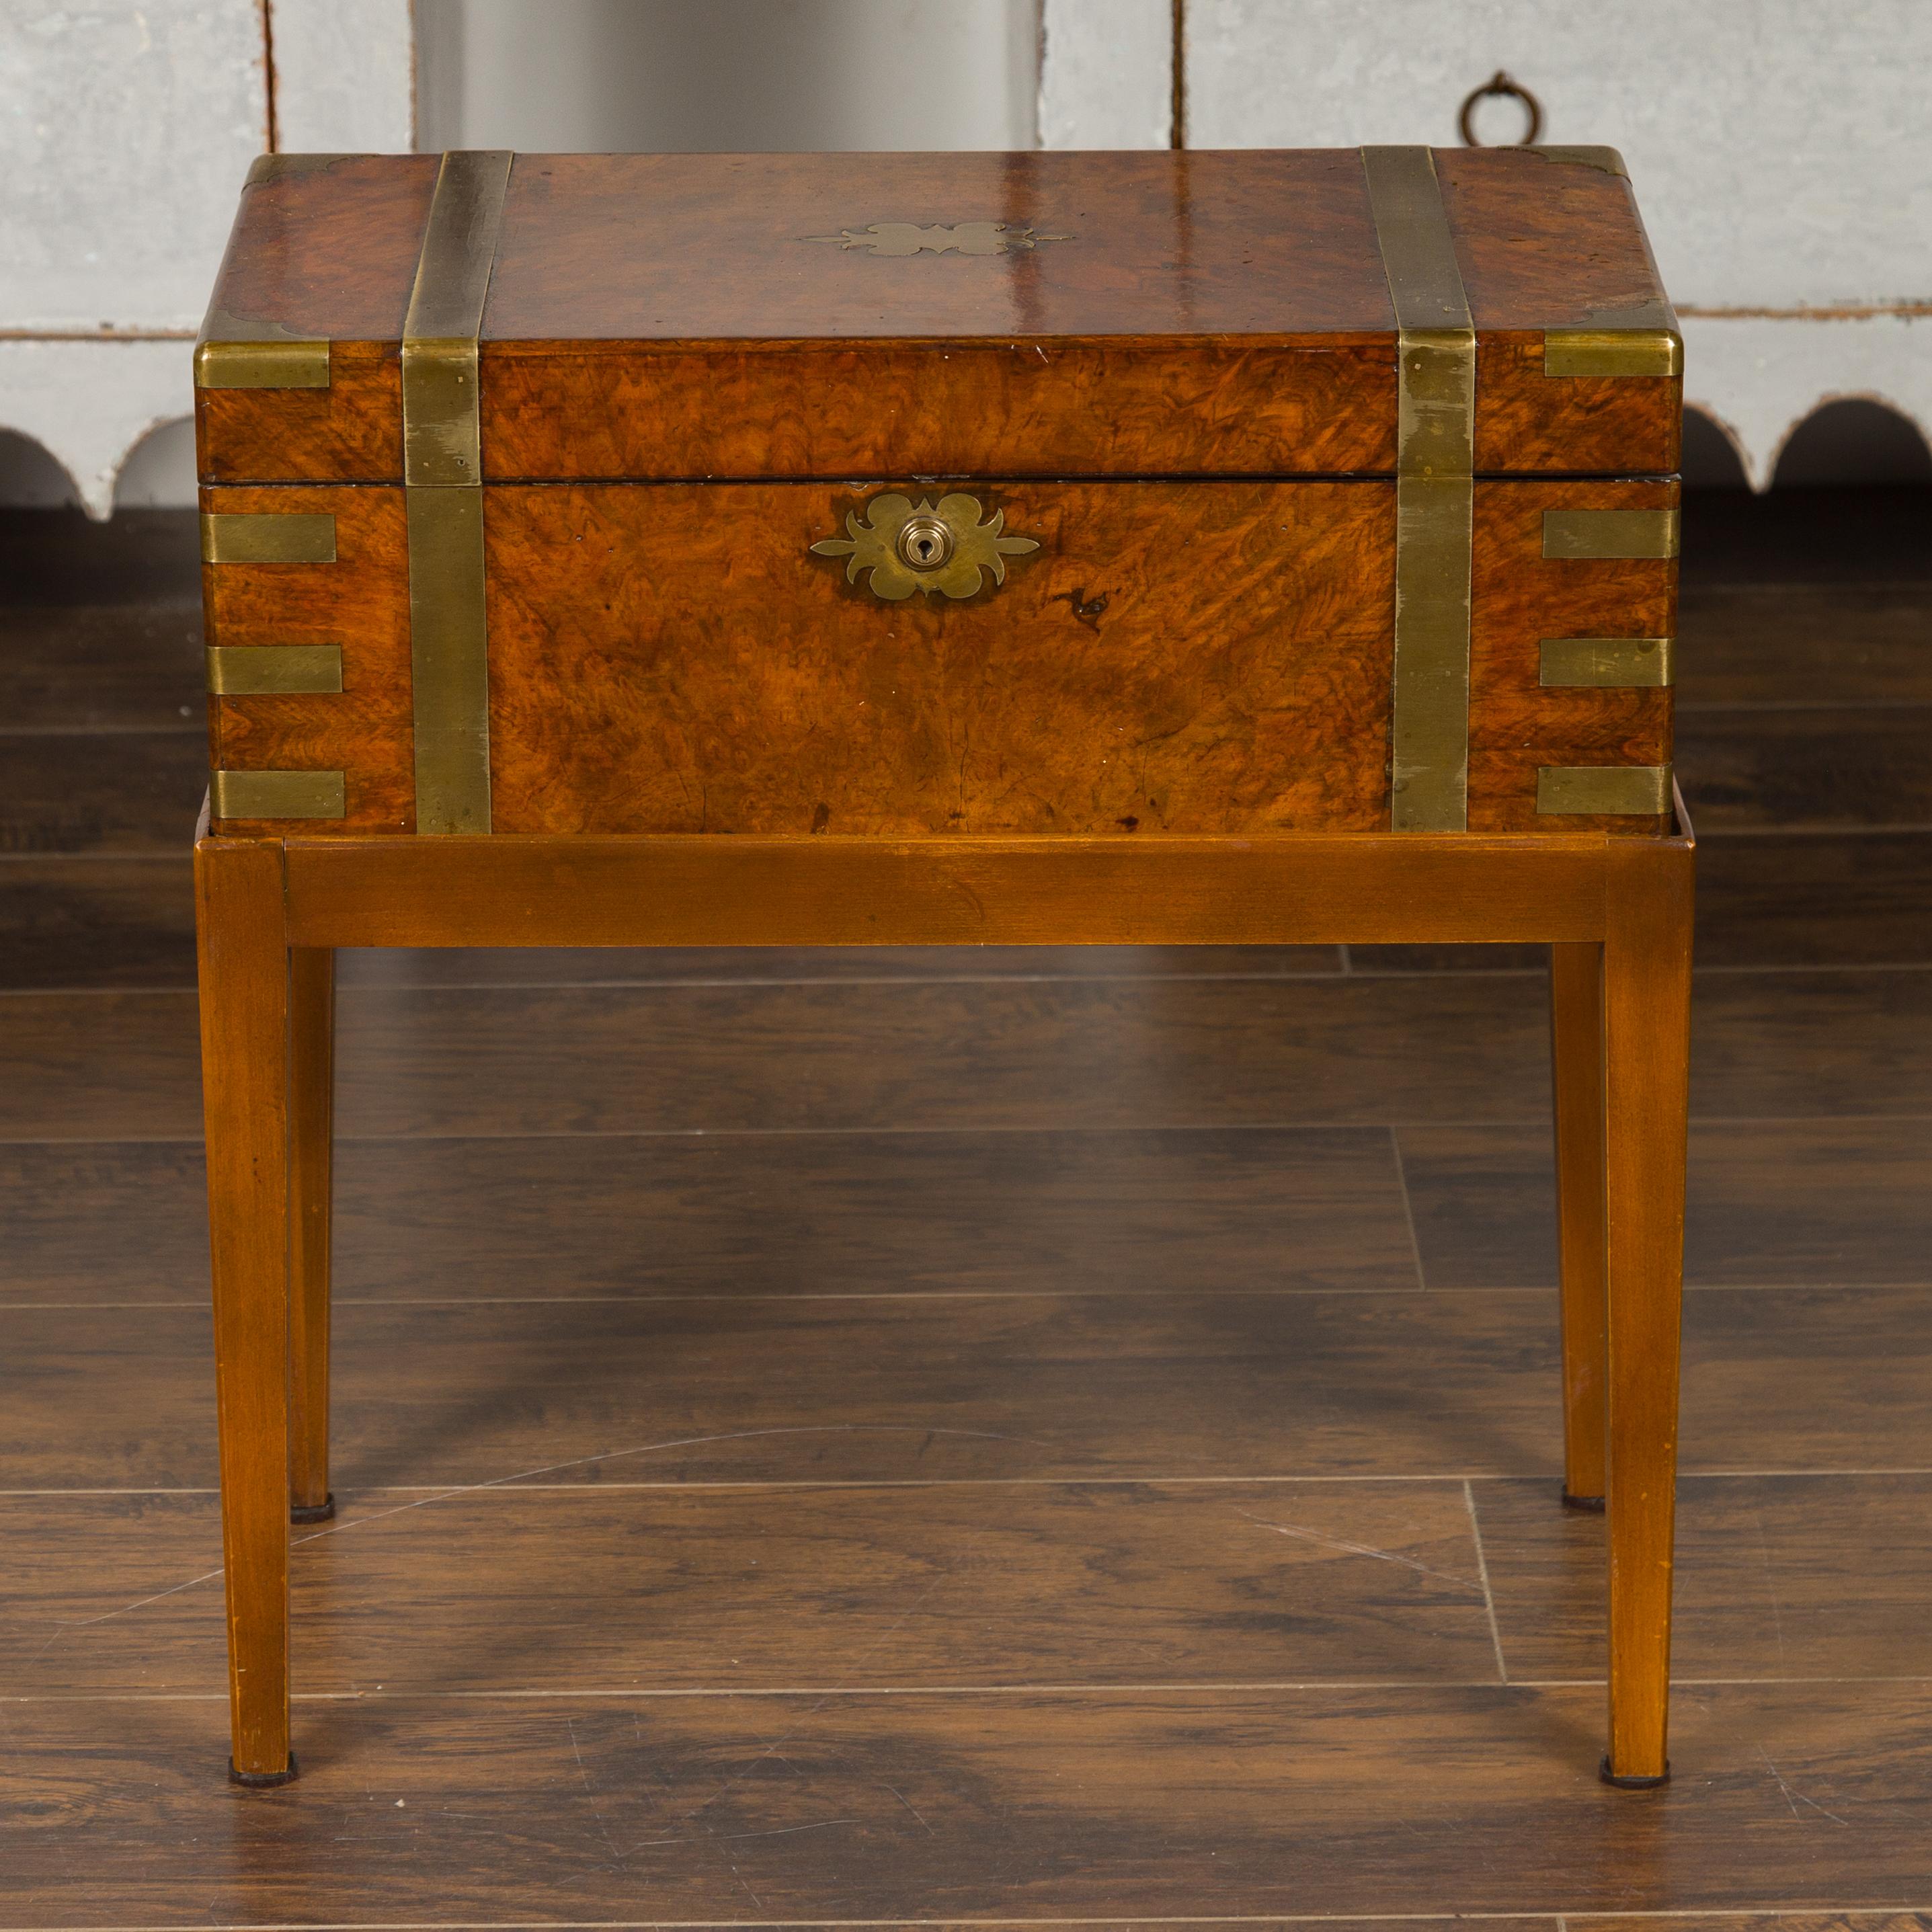 An English walnut lap desk from the mid-19th century with custom made stand and green leather inset. Born in England during the 1850s, this English box on Stand features a rectangular Campaign desk sitting above a custom made base. The brass bound